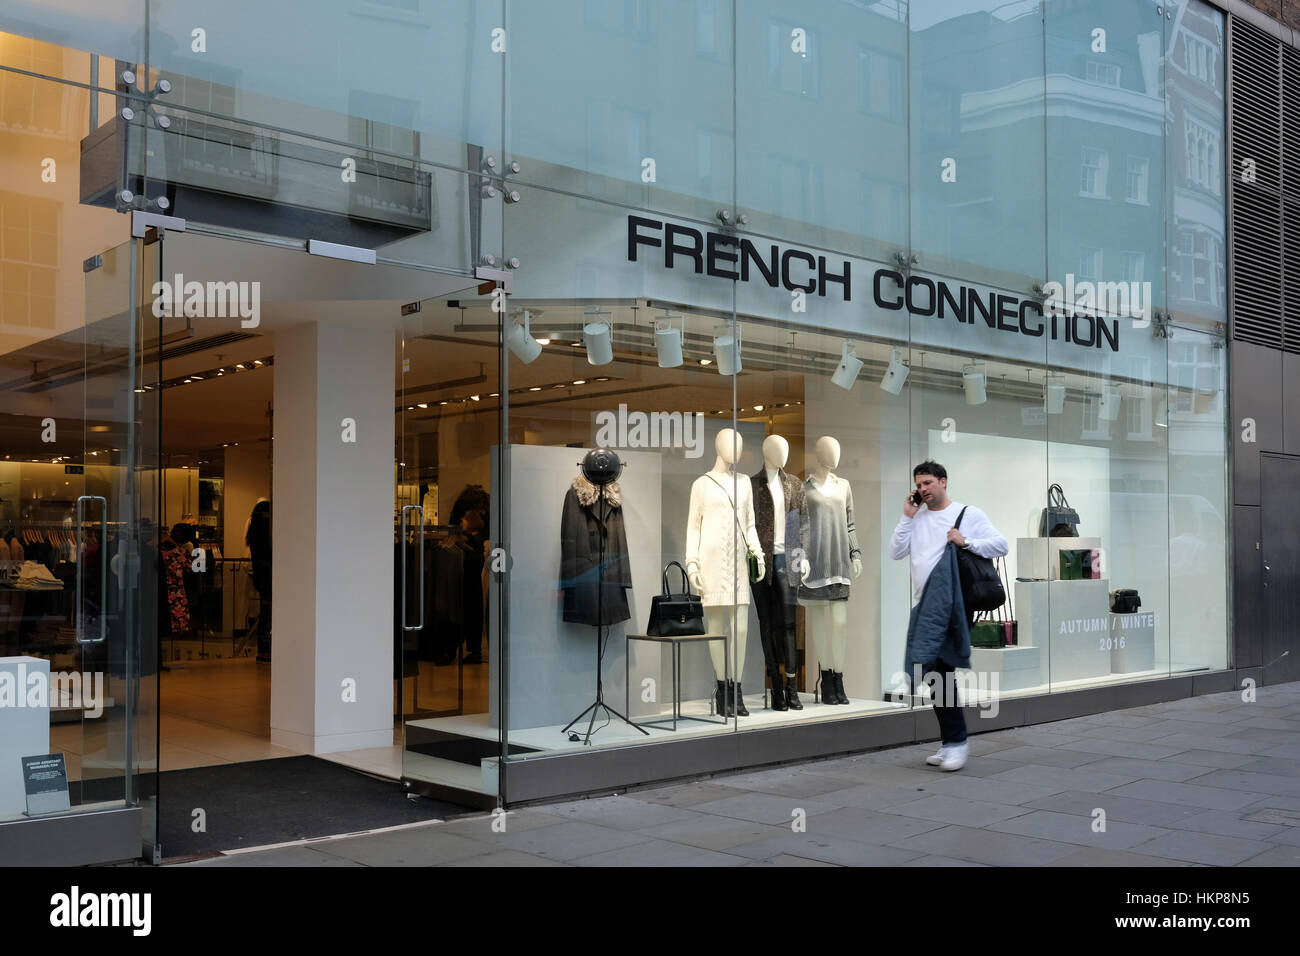 FRENCH CONNECTION store in Covent Garden, London, UK. Stock Photo